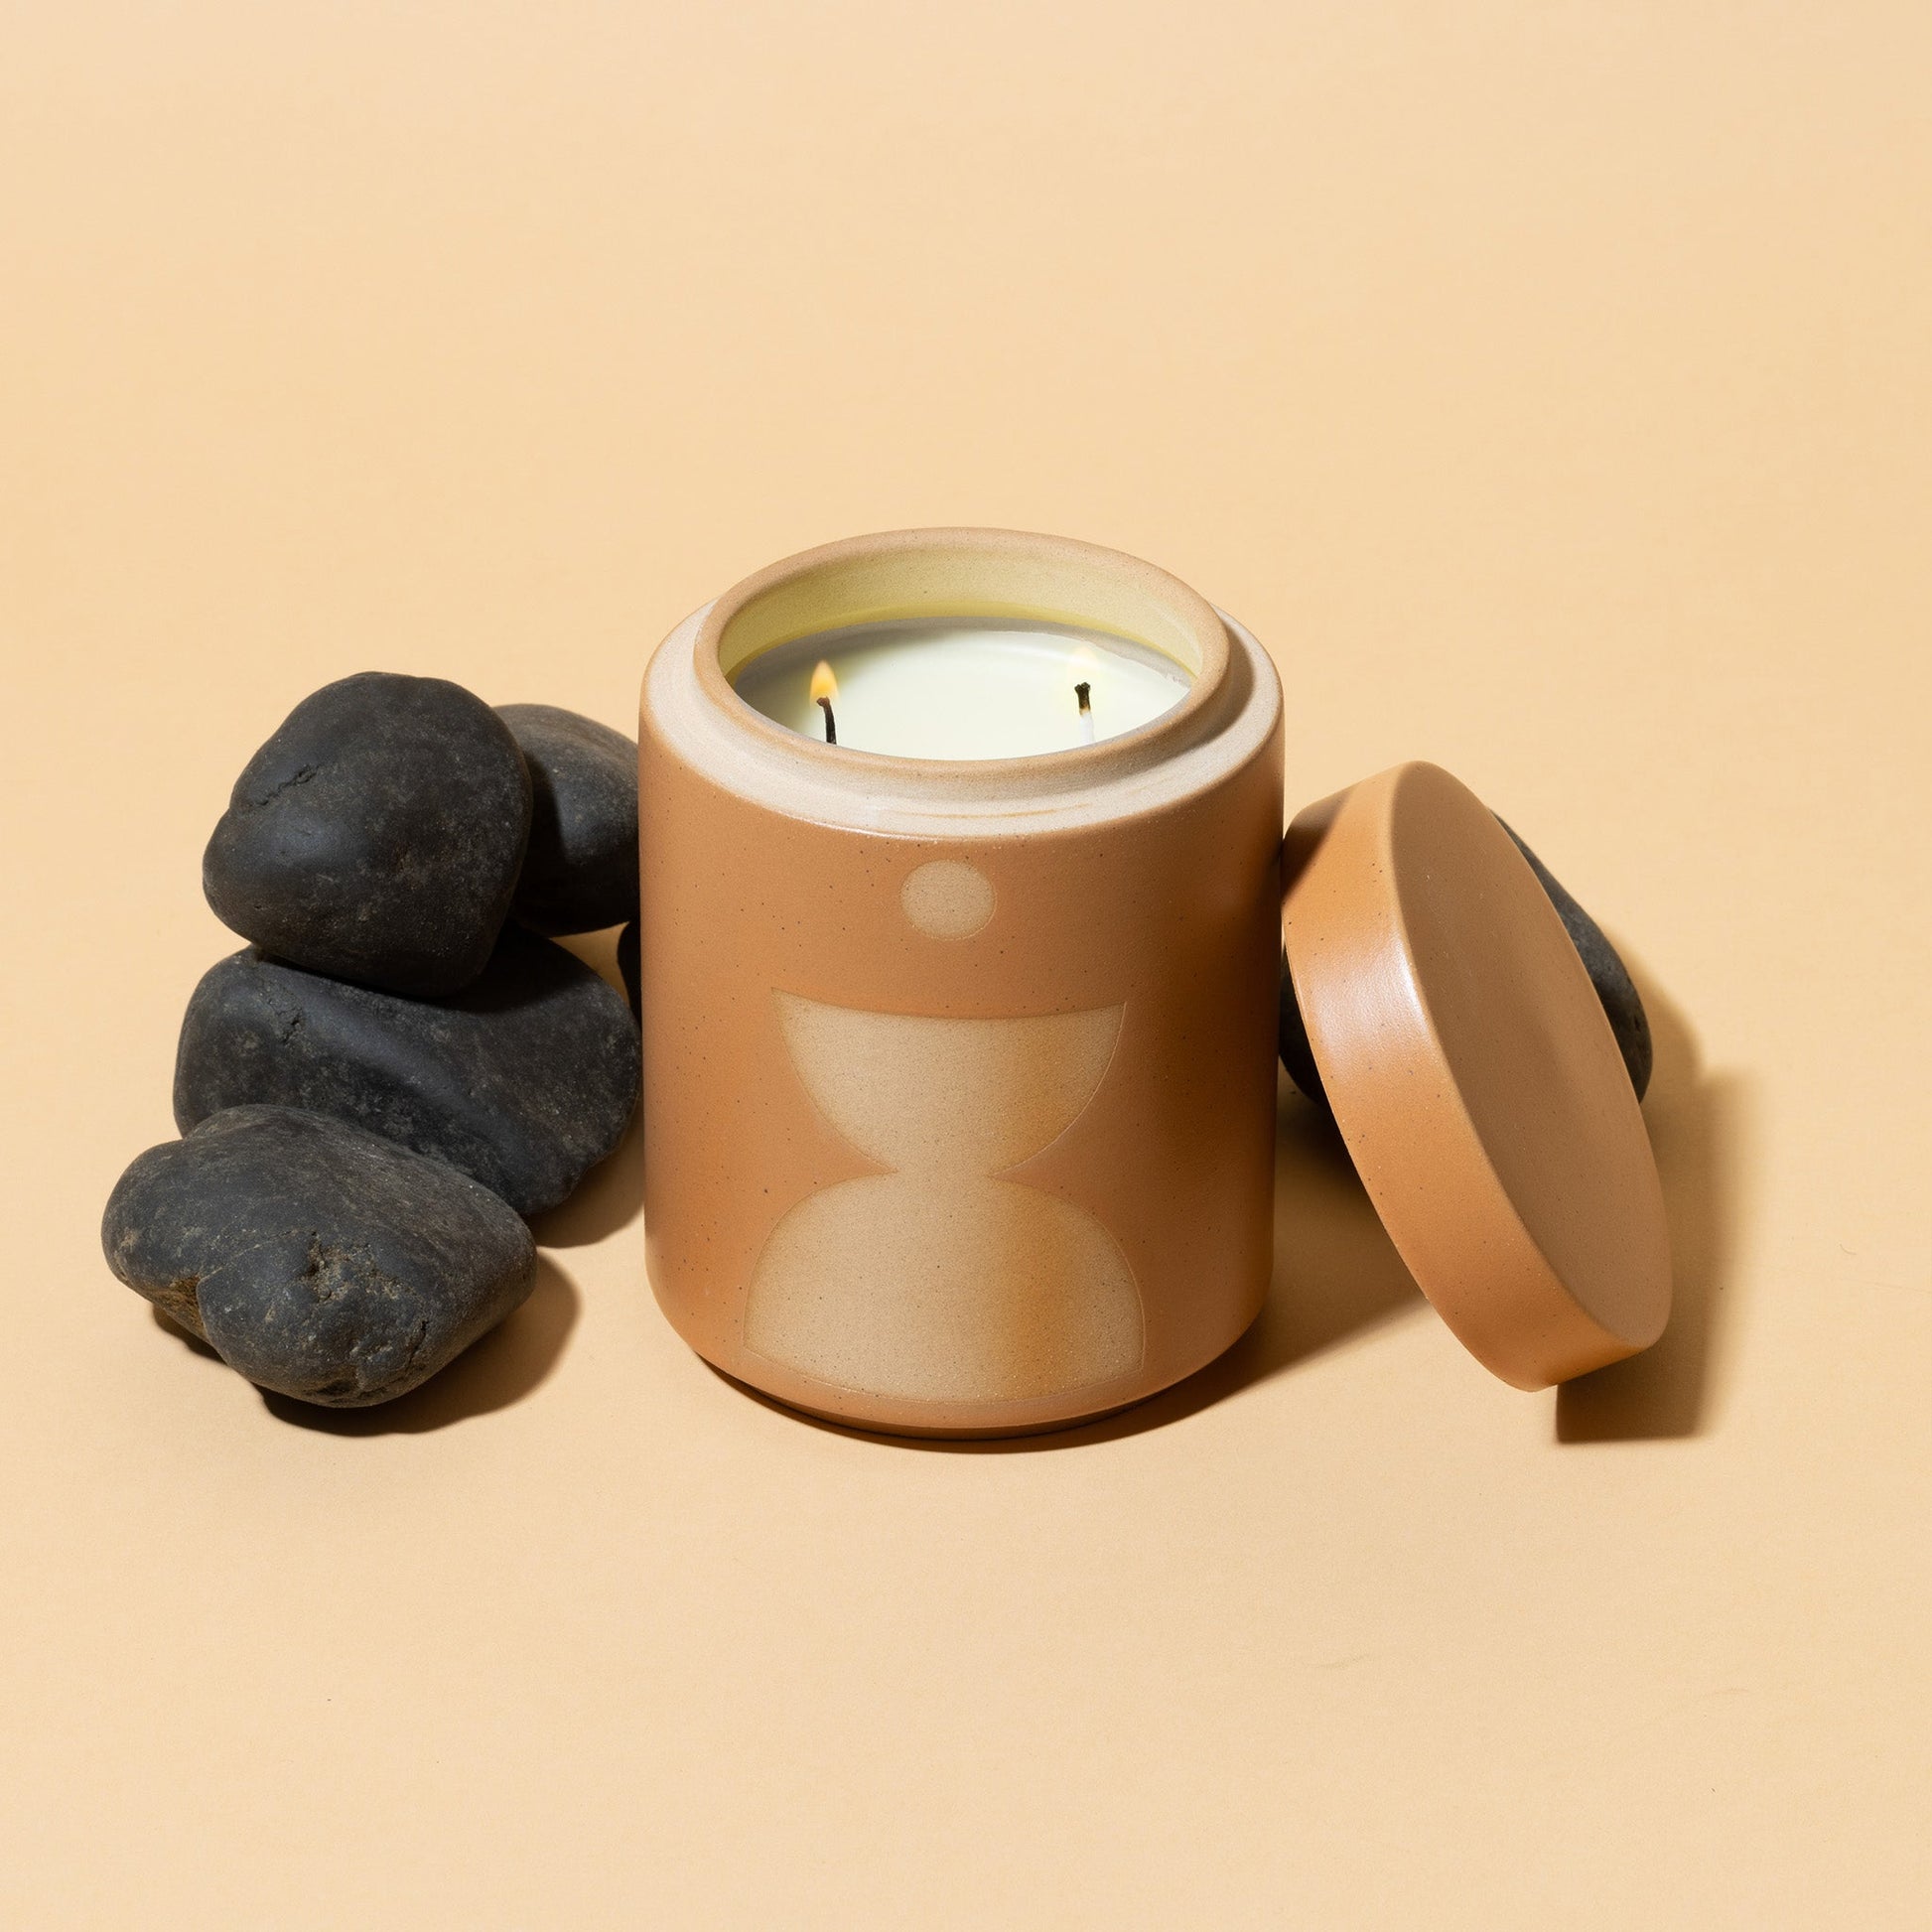 12 oz copper-colored cylindrical ceramic vessel with ceramic lid; white wax and two cotton wicks; reflected beige mirrored semi-circle design on the side